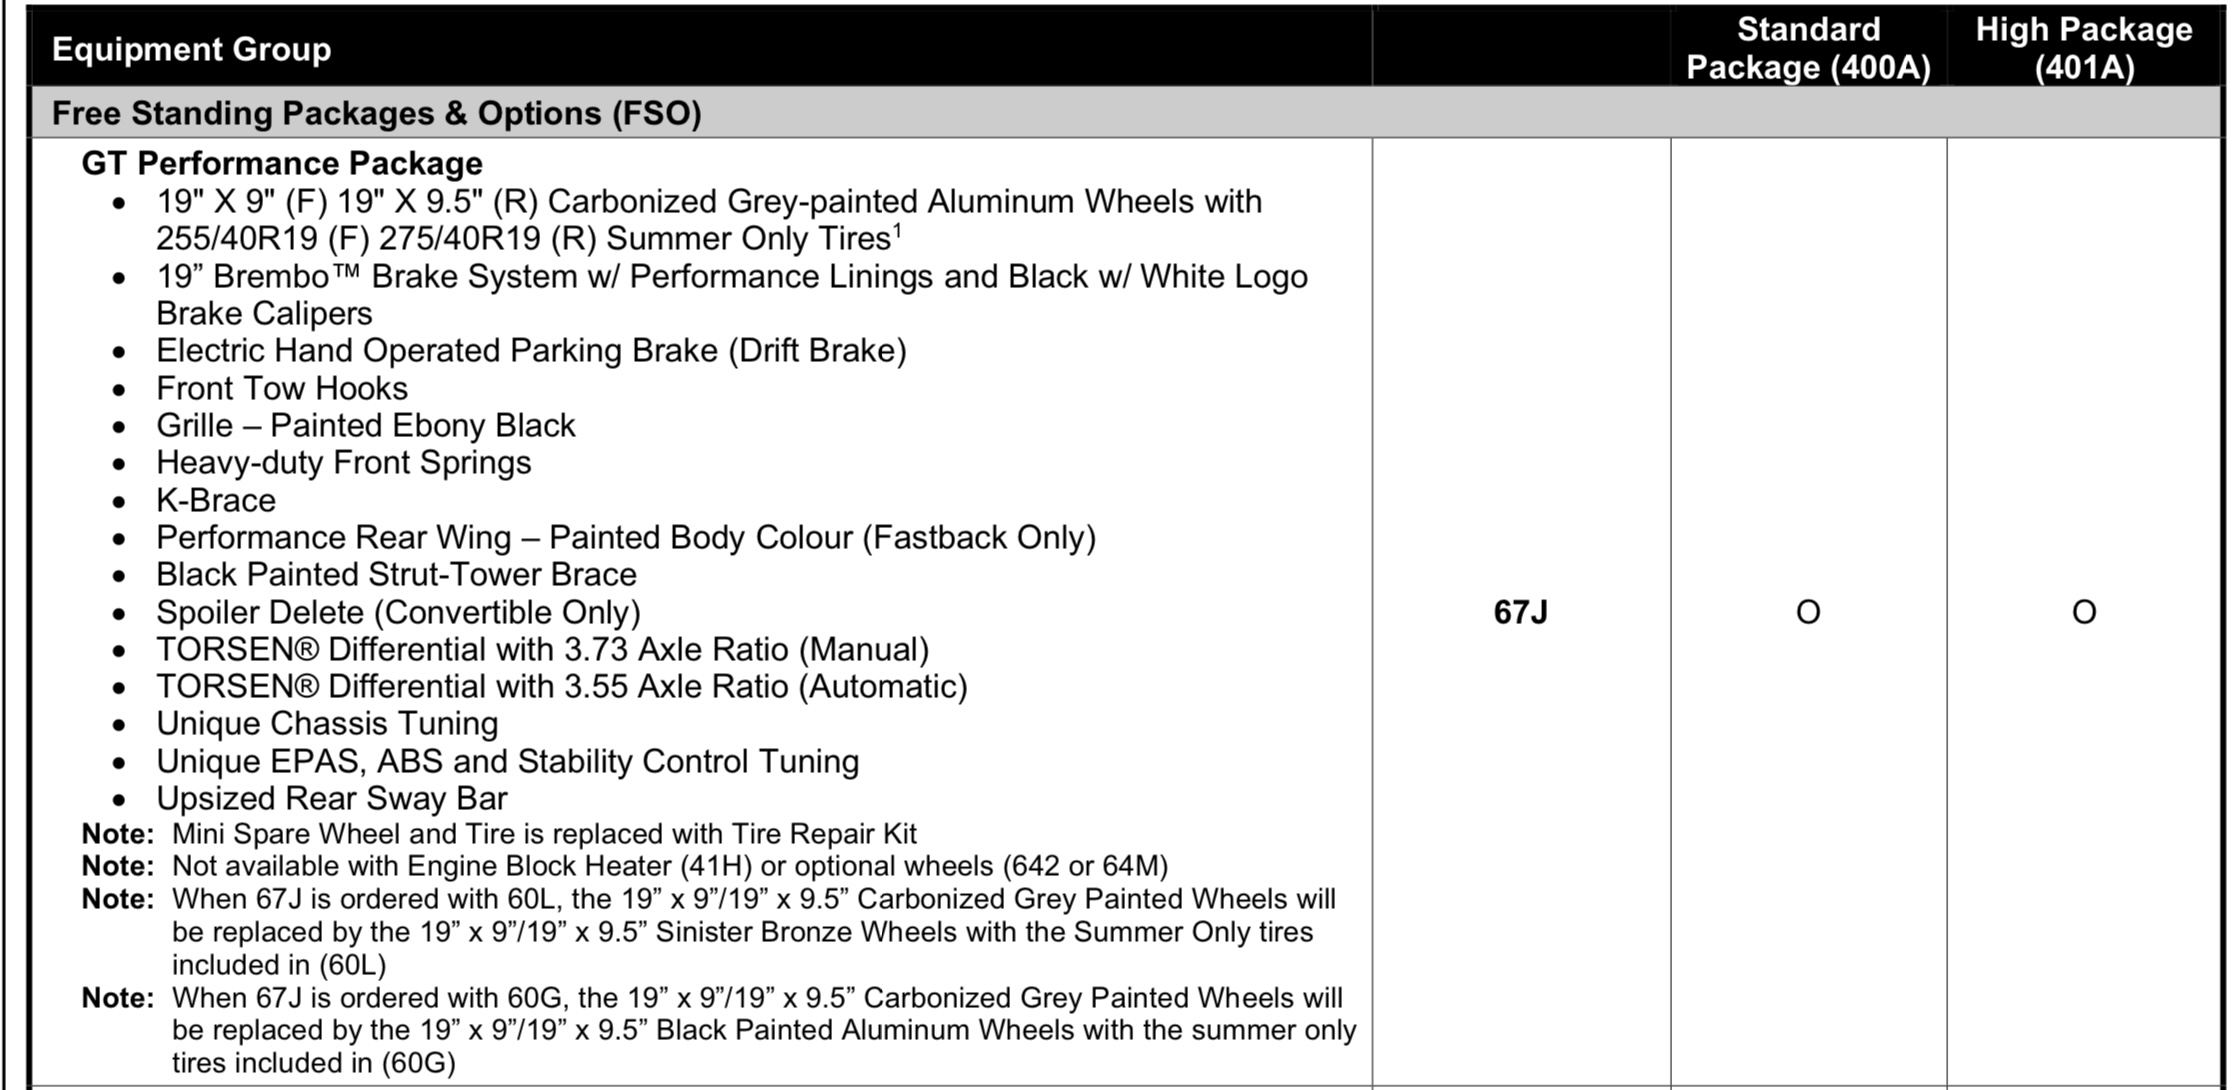 S650 Mustang Latest 2024 Mustang Order Guide and Price List (w/ MSRP & Invoice)! 8585EFF1-0DF3-4944-86C0-82C90113DB7C